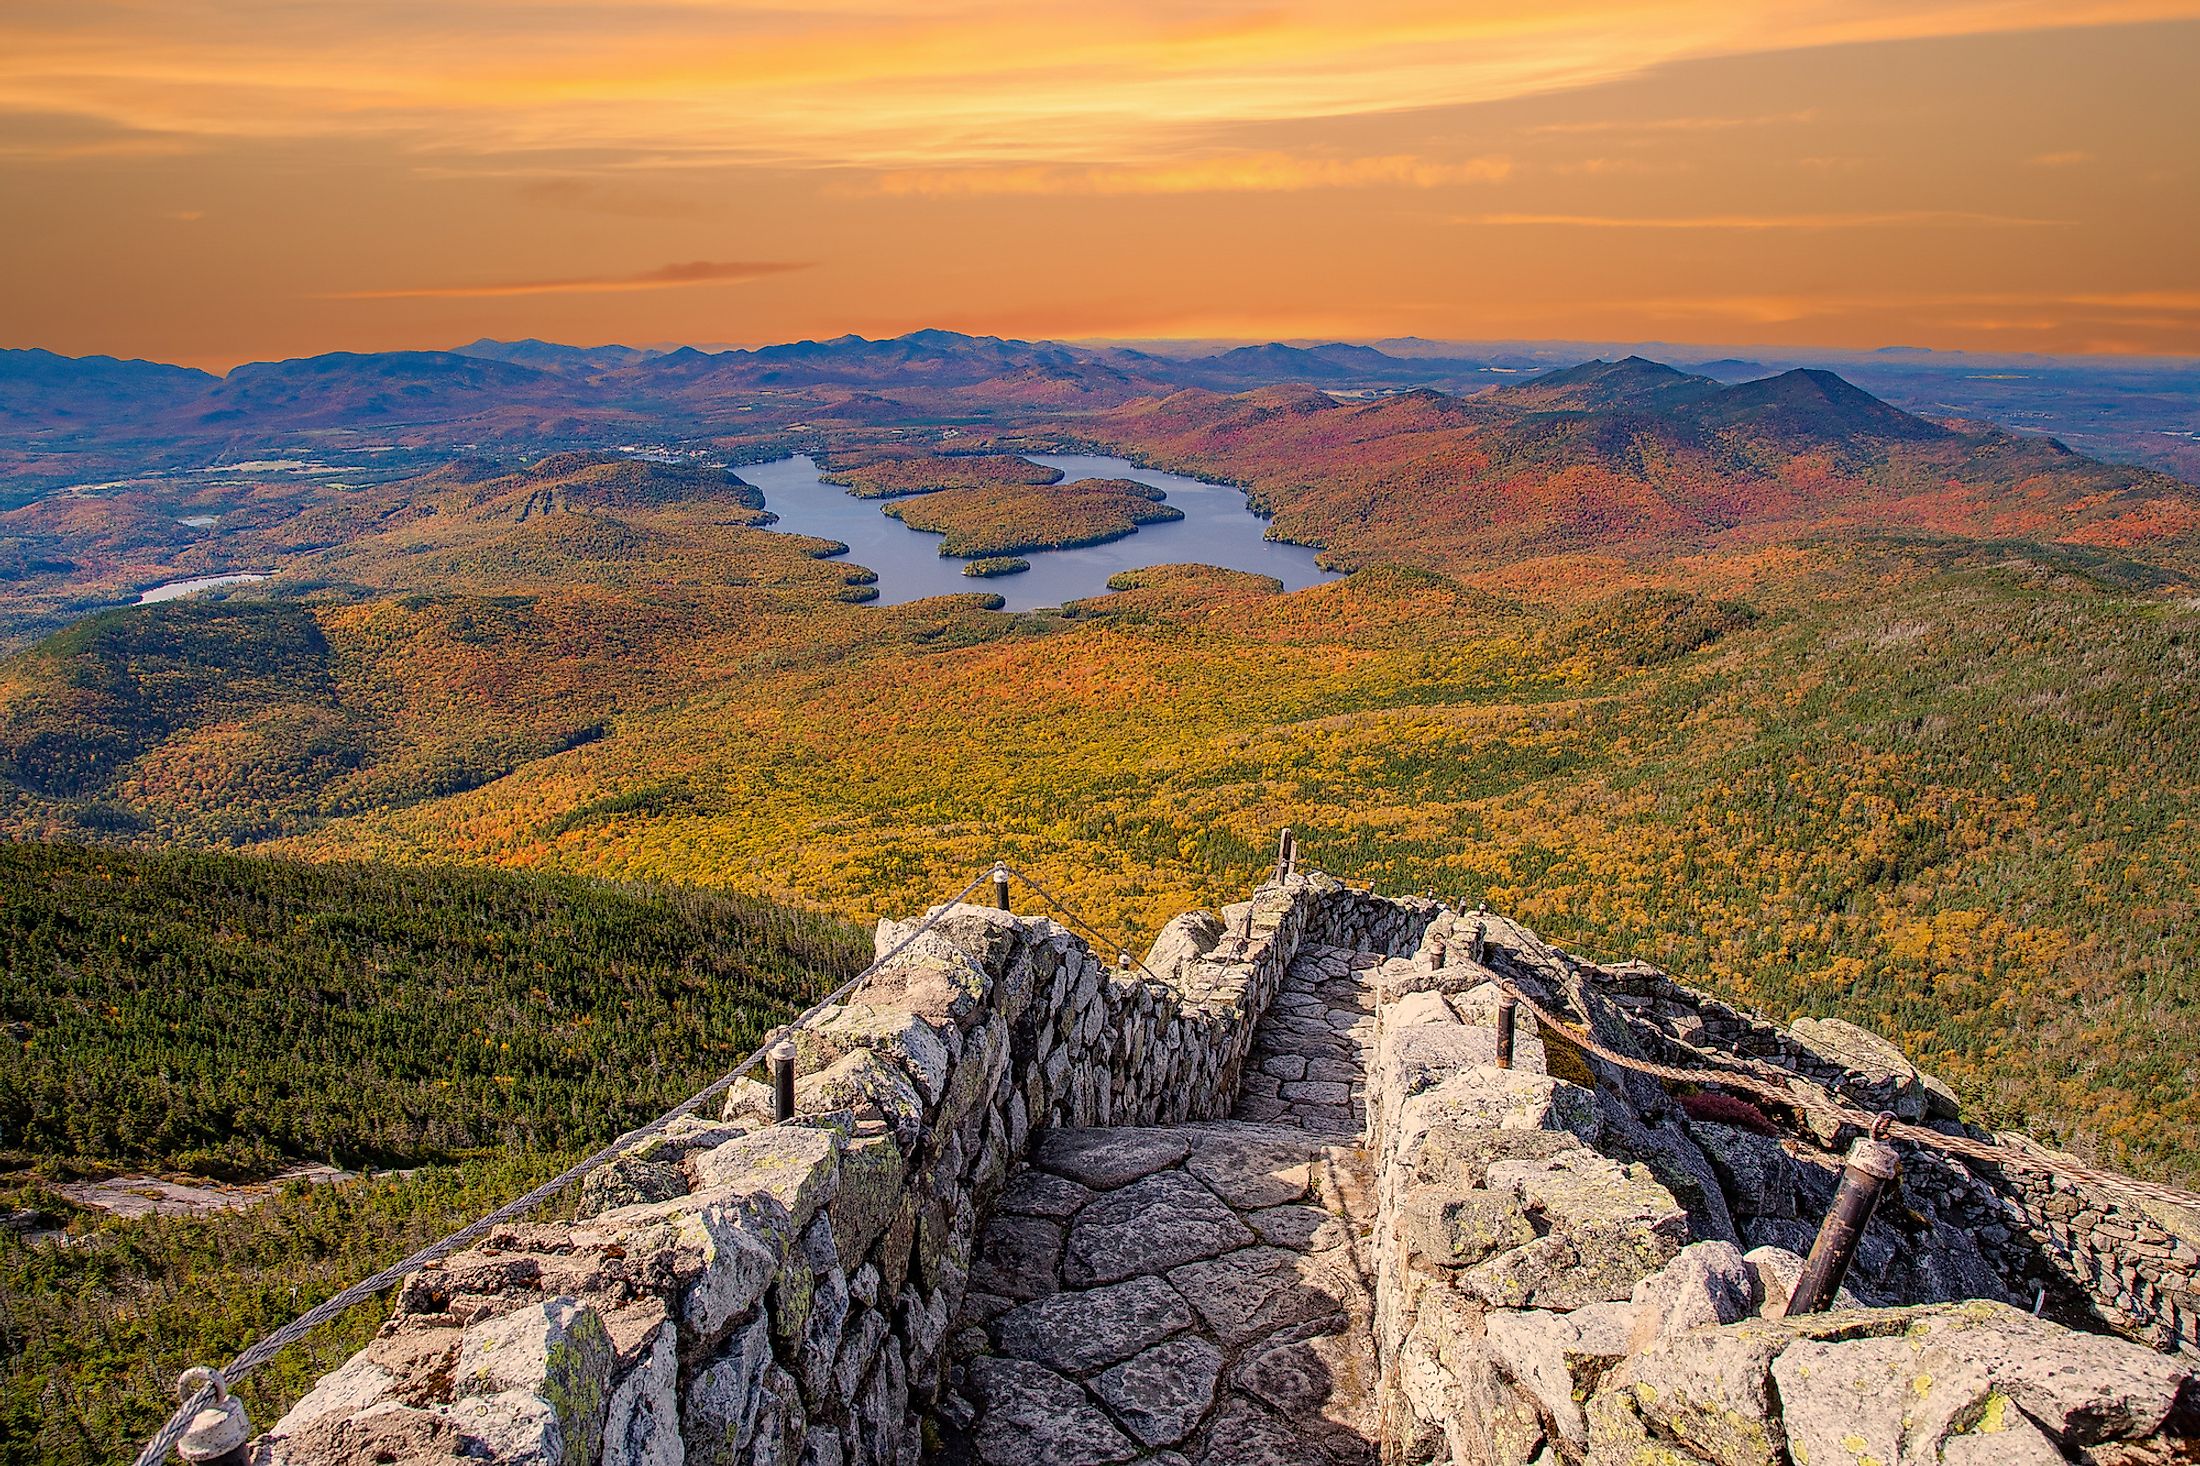 View of Lake Placid, New York and surrounding fall landscape from the mountain.